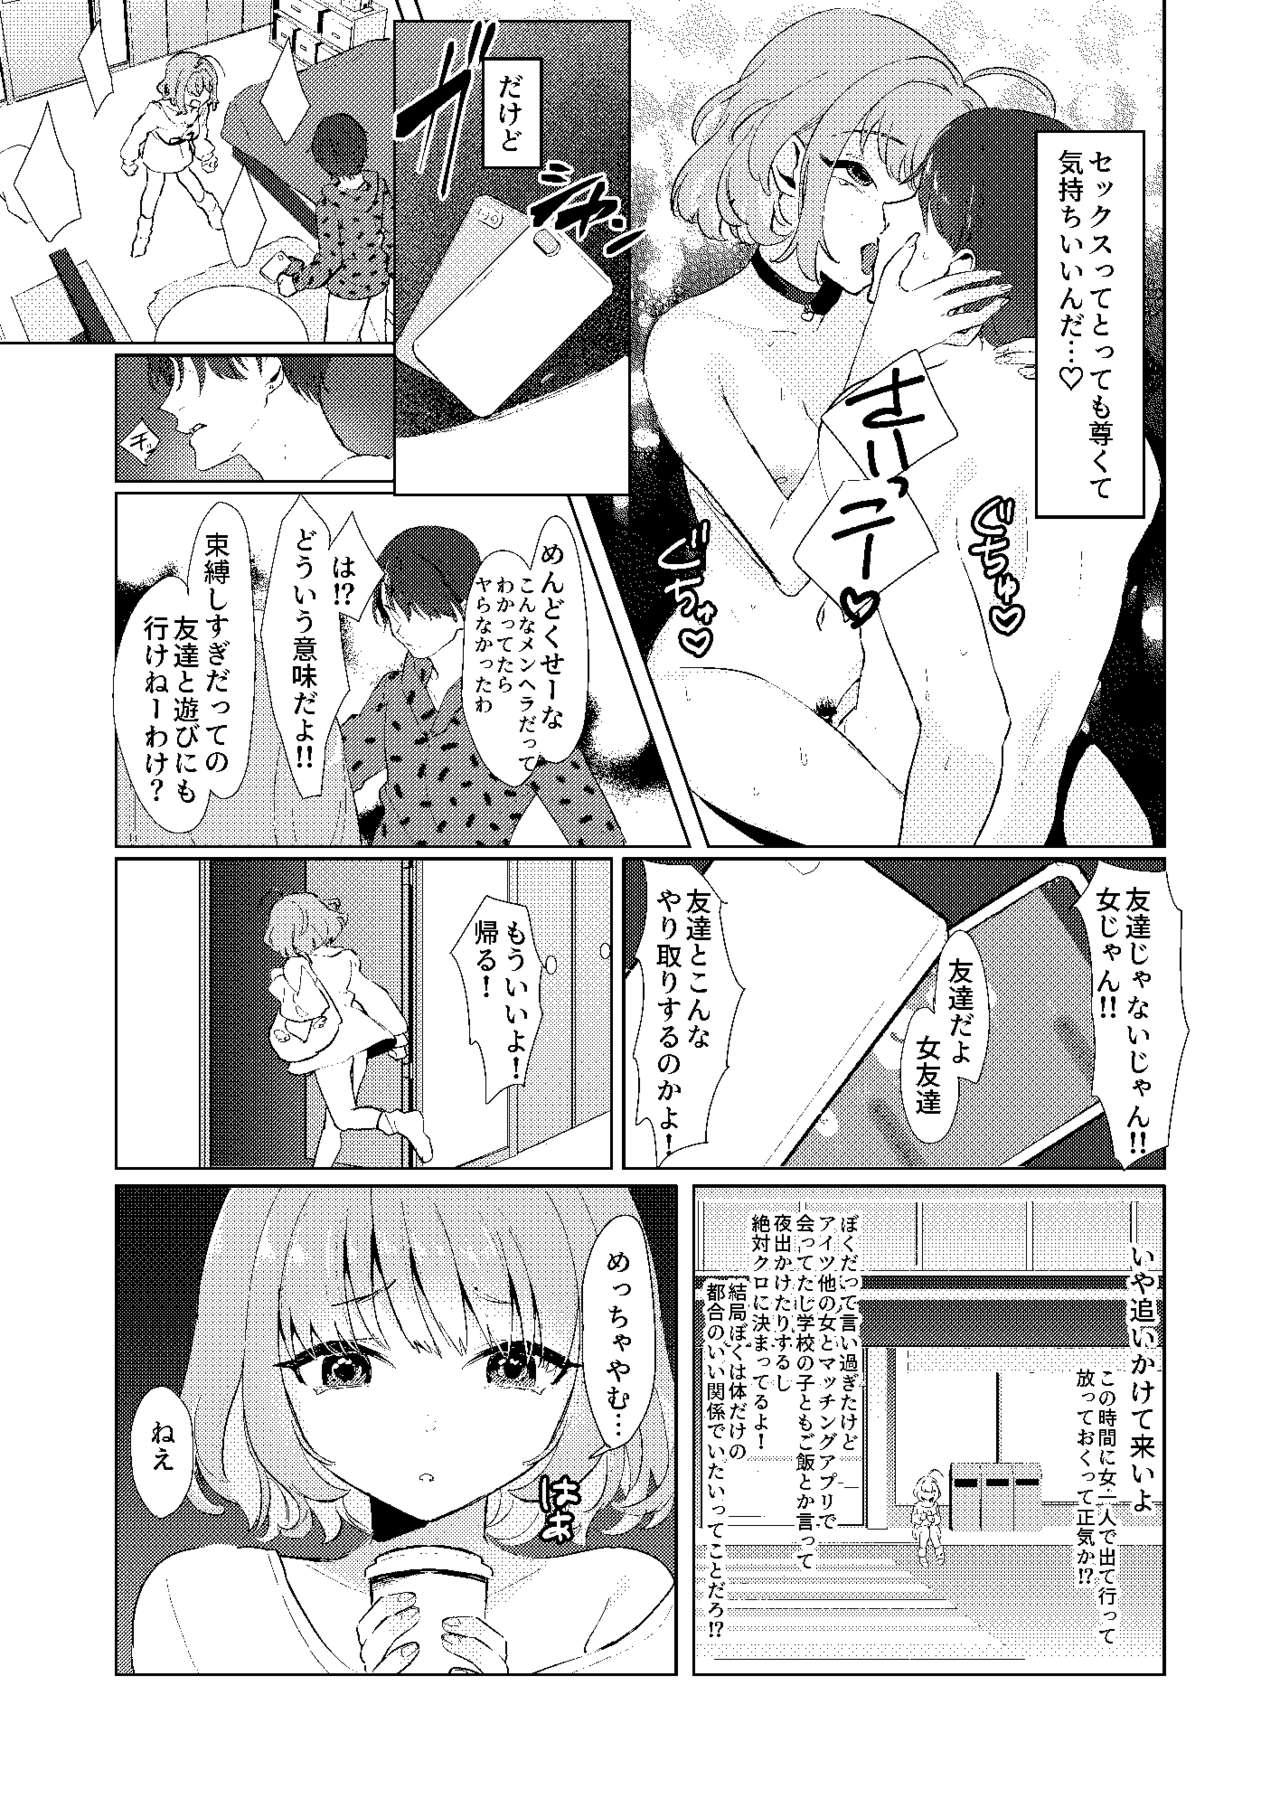 Girlfriends 夢〇りあむの青春 - The idolmaster Harcore - Page 10